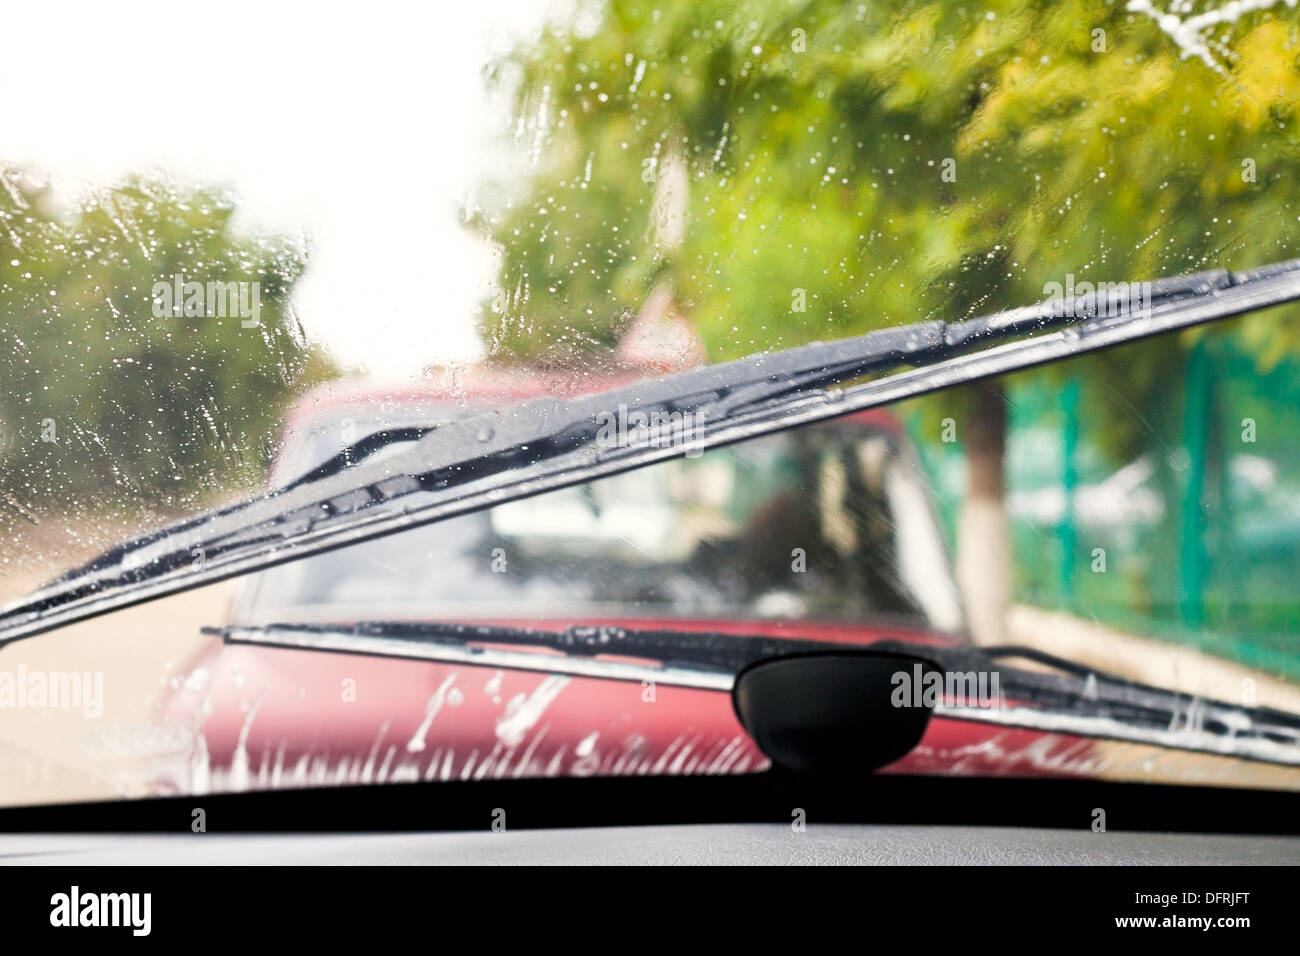 Car wipers wash windshield when driving in rain Stock Photo